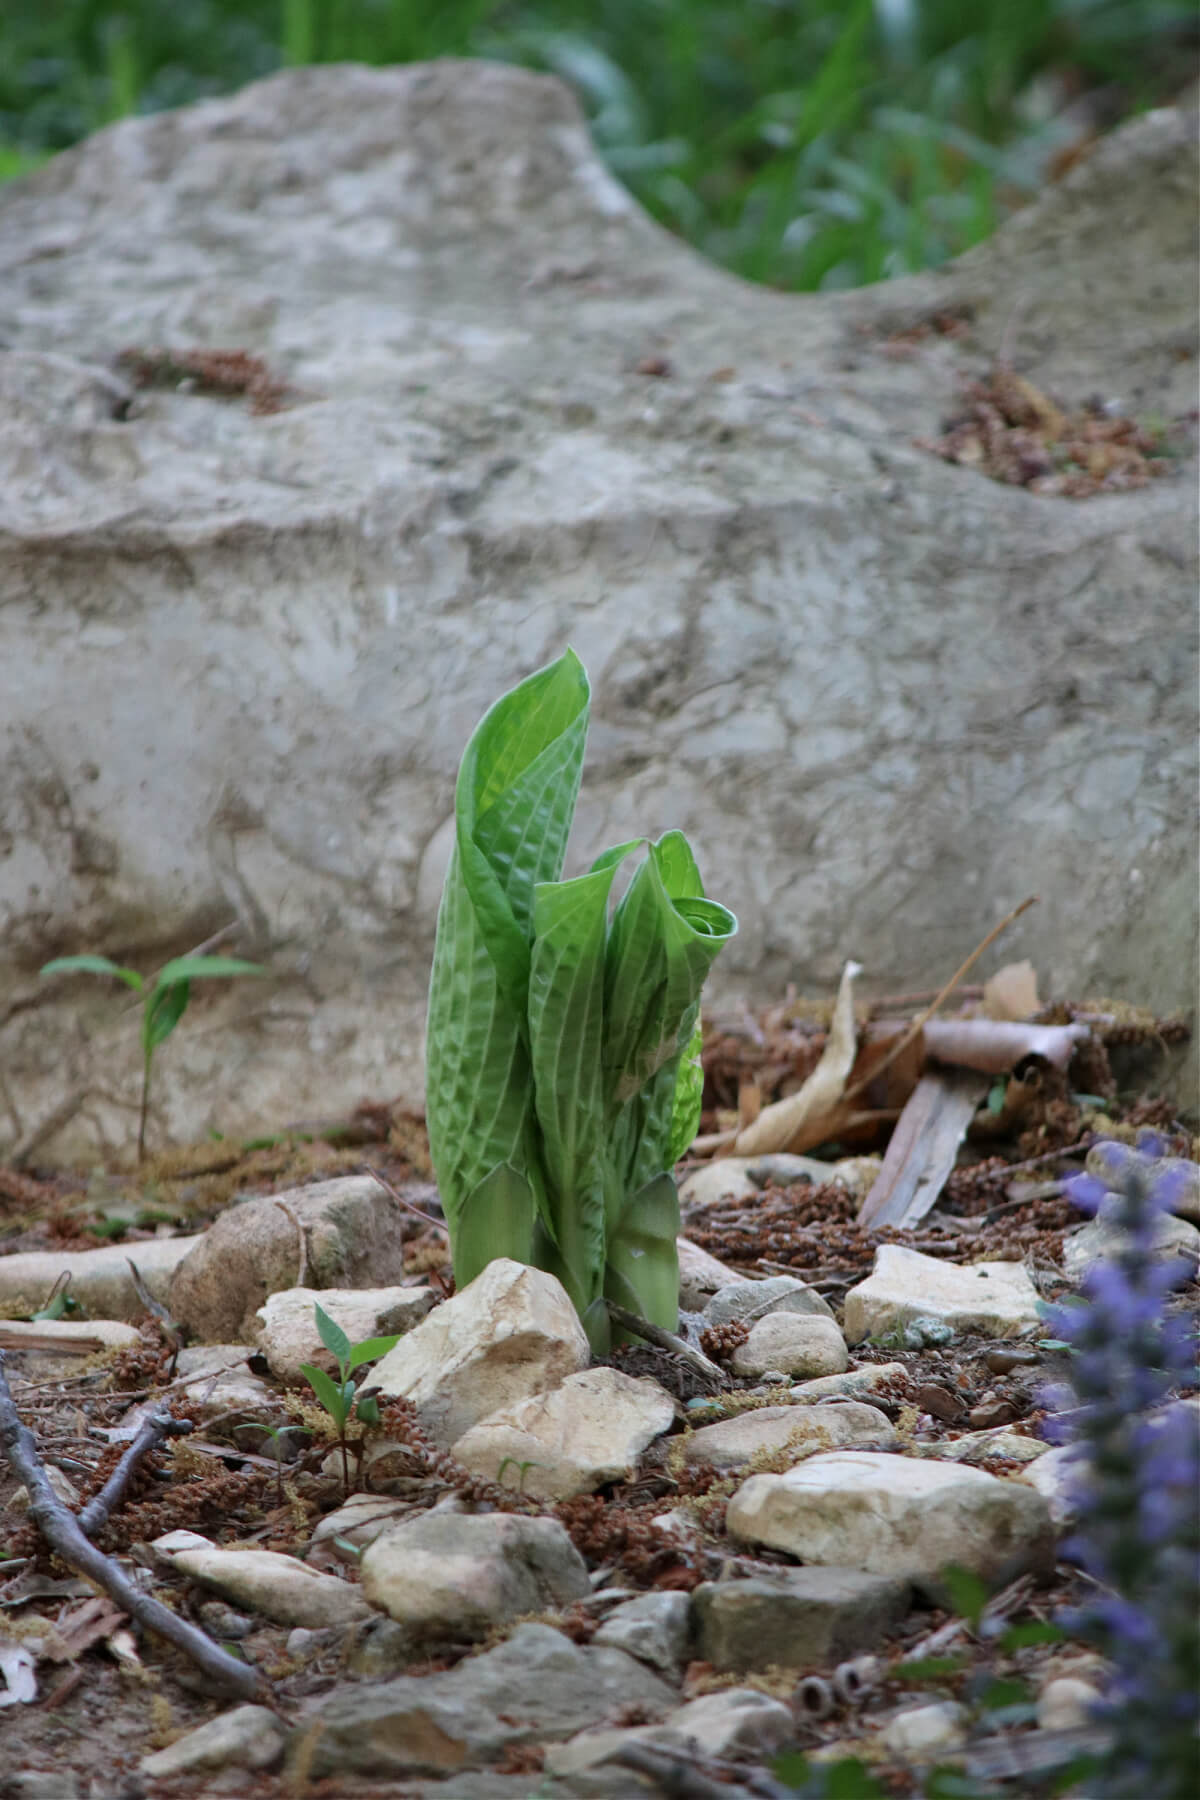 A Hosta plant coming up last spring